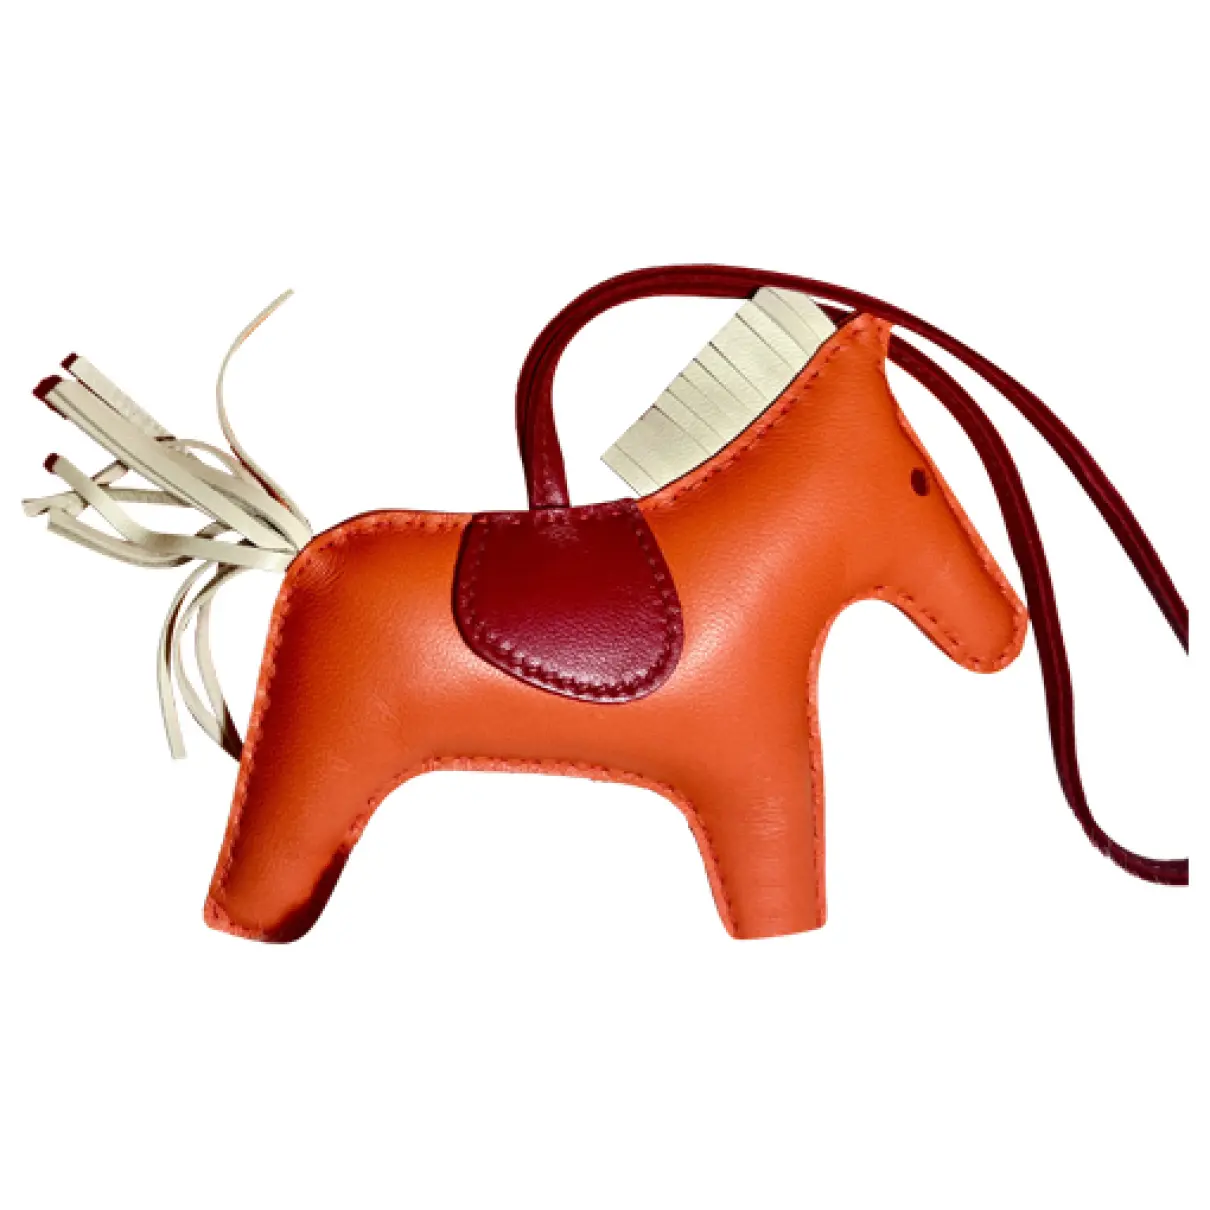 Rodeo leather bag charm